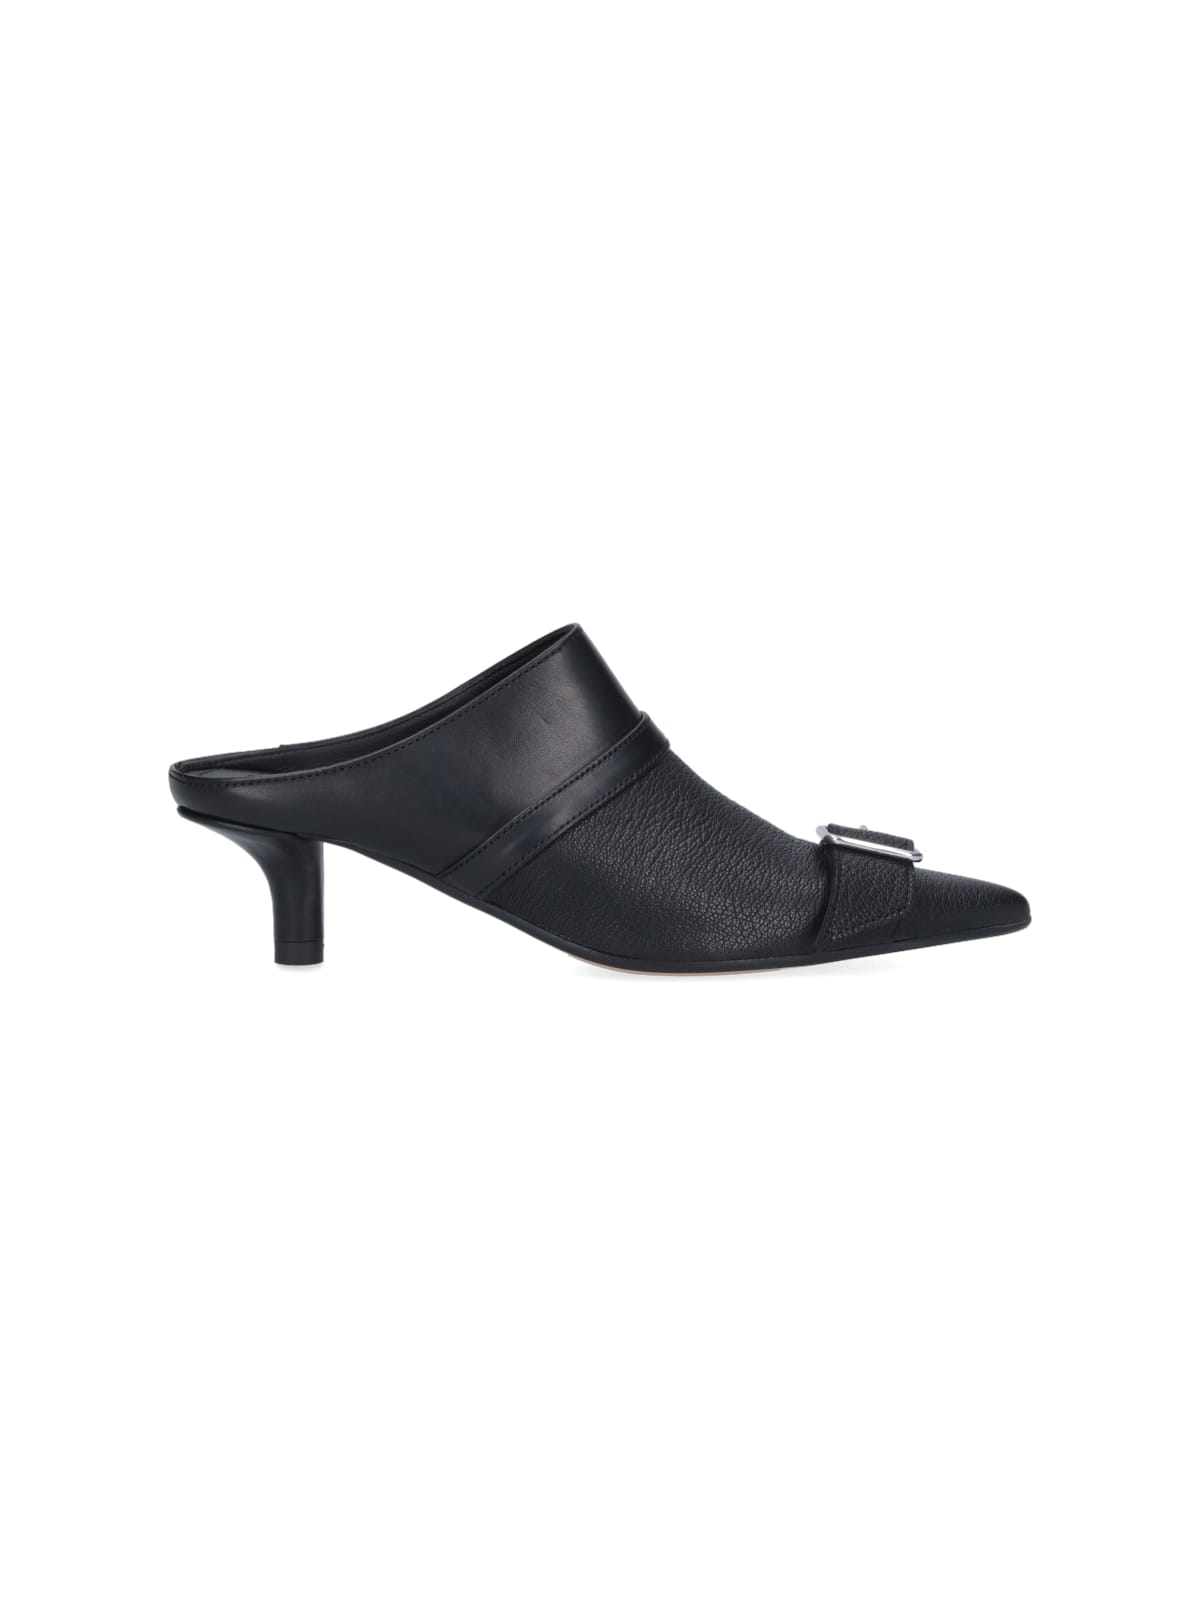 Mm6 Maison Margiela Mules With Buckle In Black